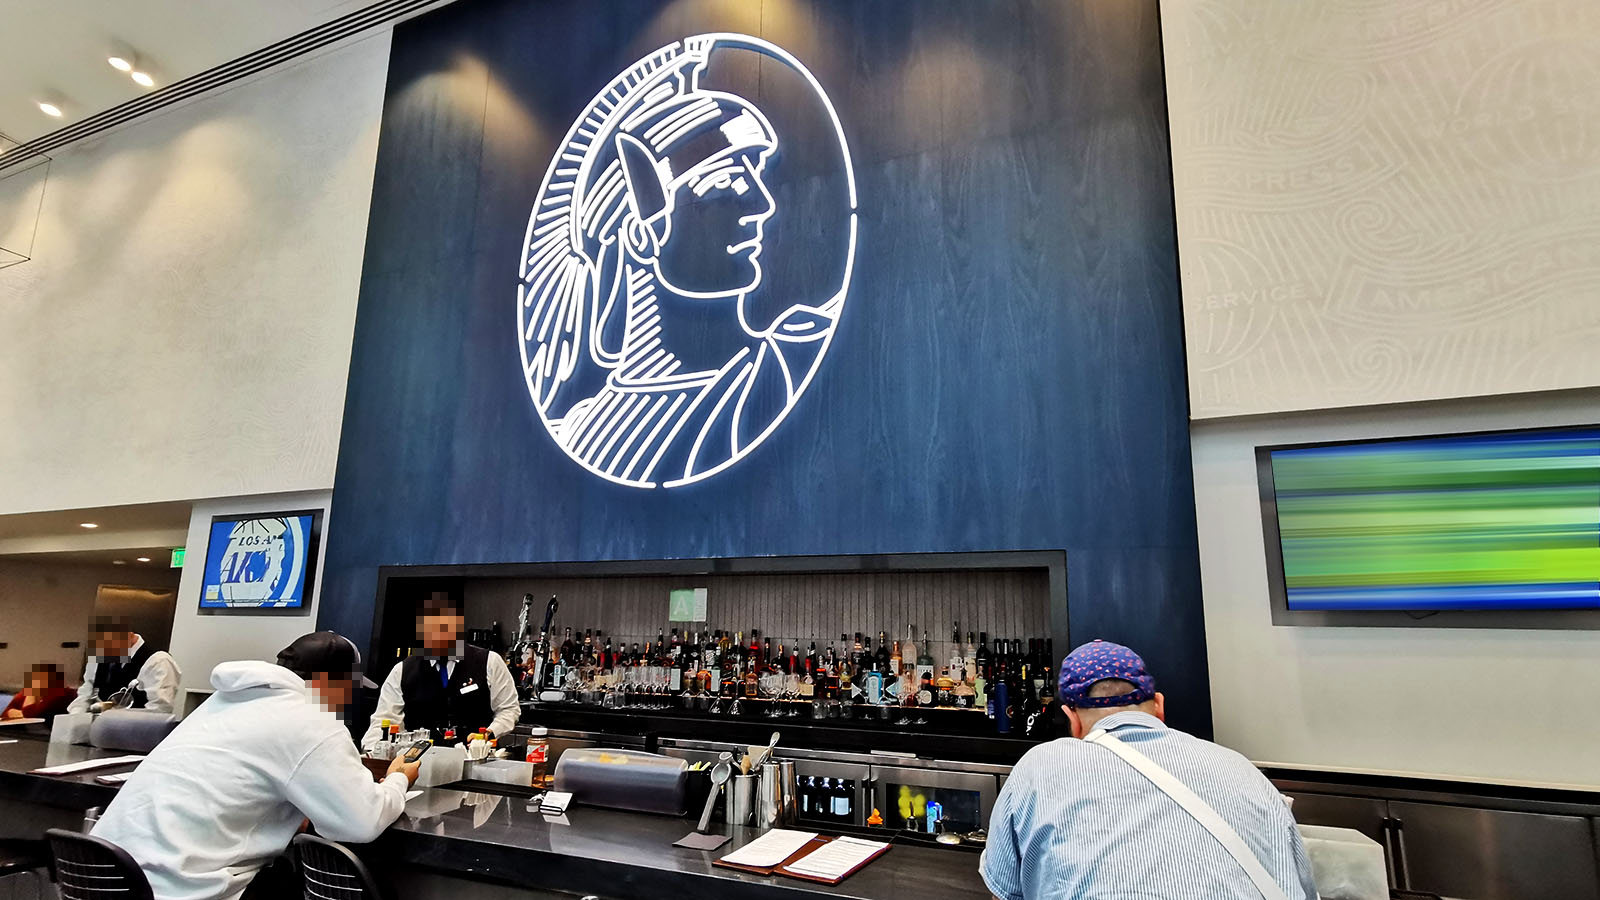 Bartender service in The Centurion Lounge, Los Angeles